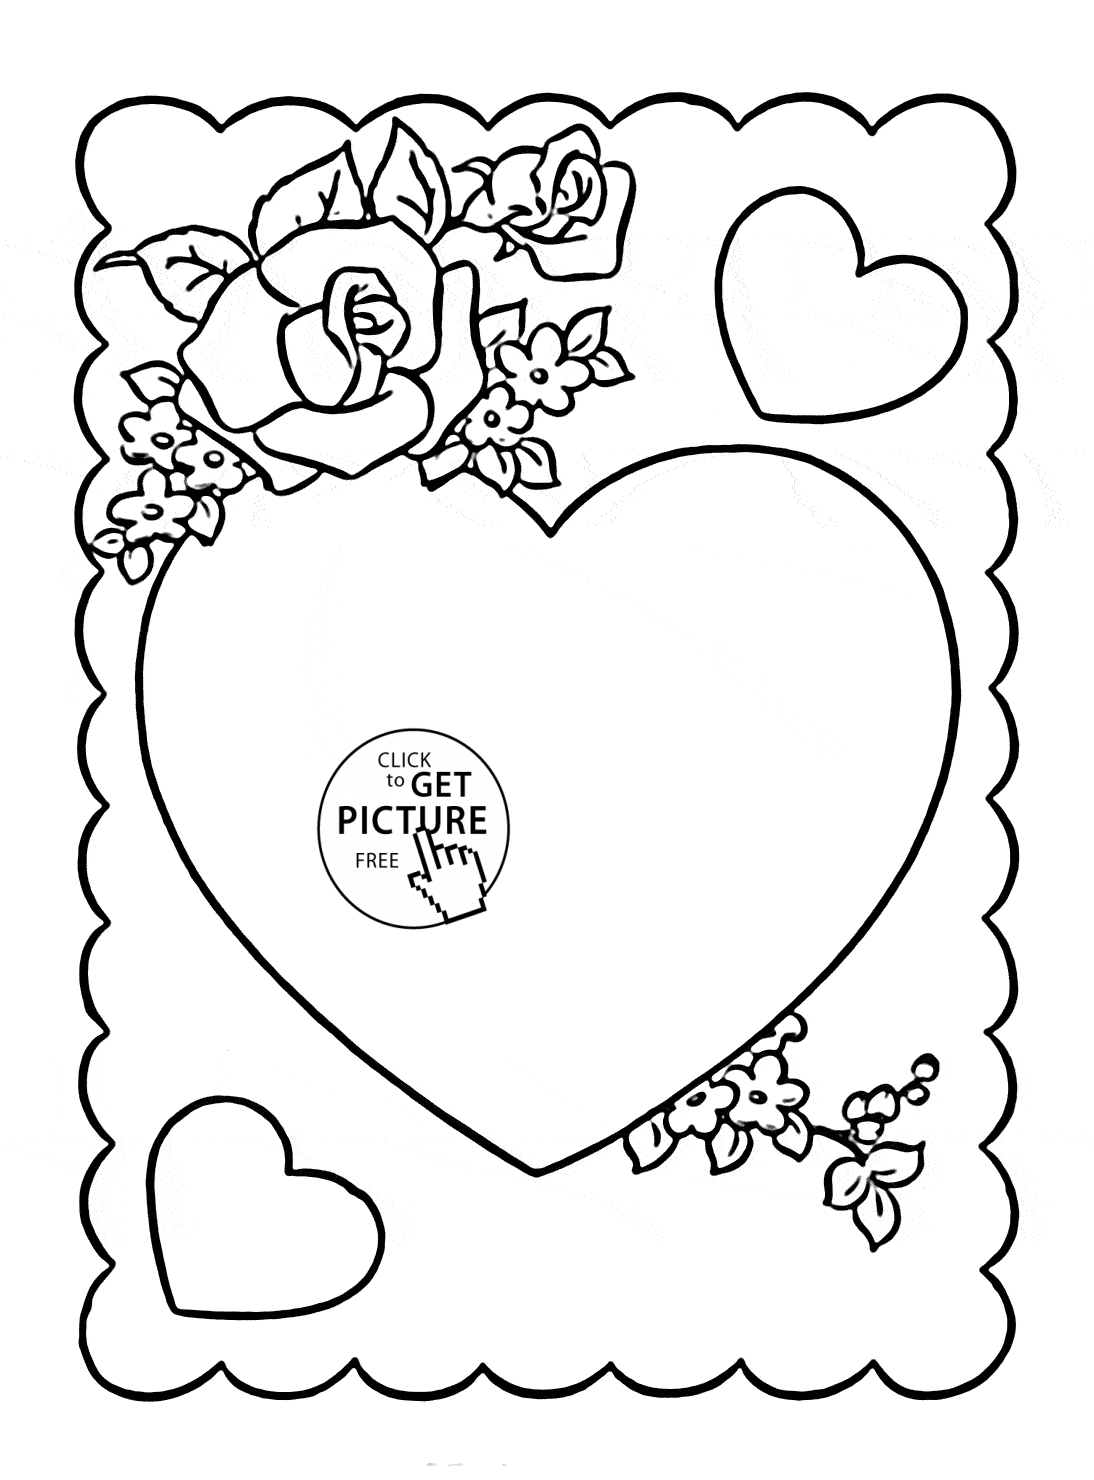 Roses And Hearts Coloring Pages Coloring Pages Coloring Pages Of Hearts With Wings And Flowers